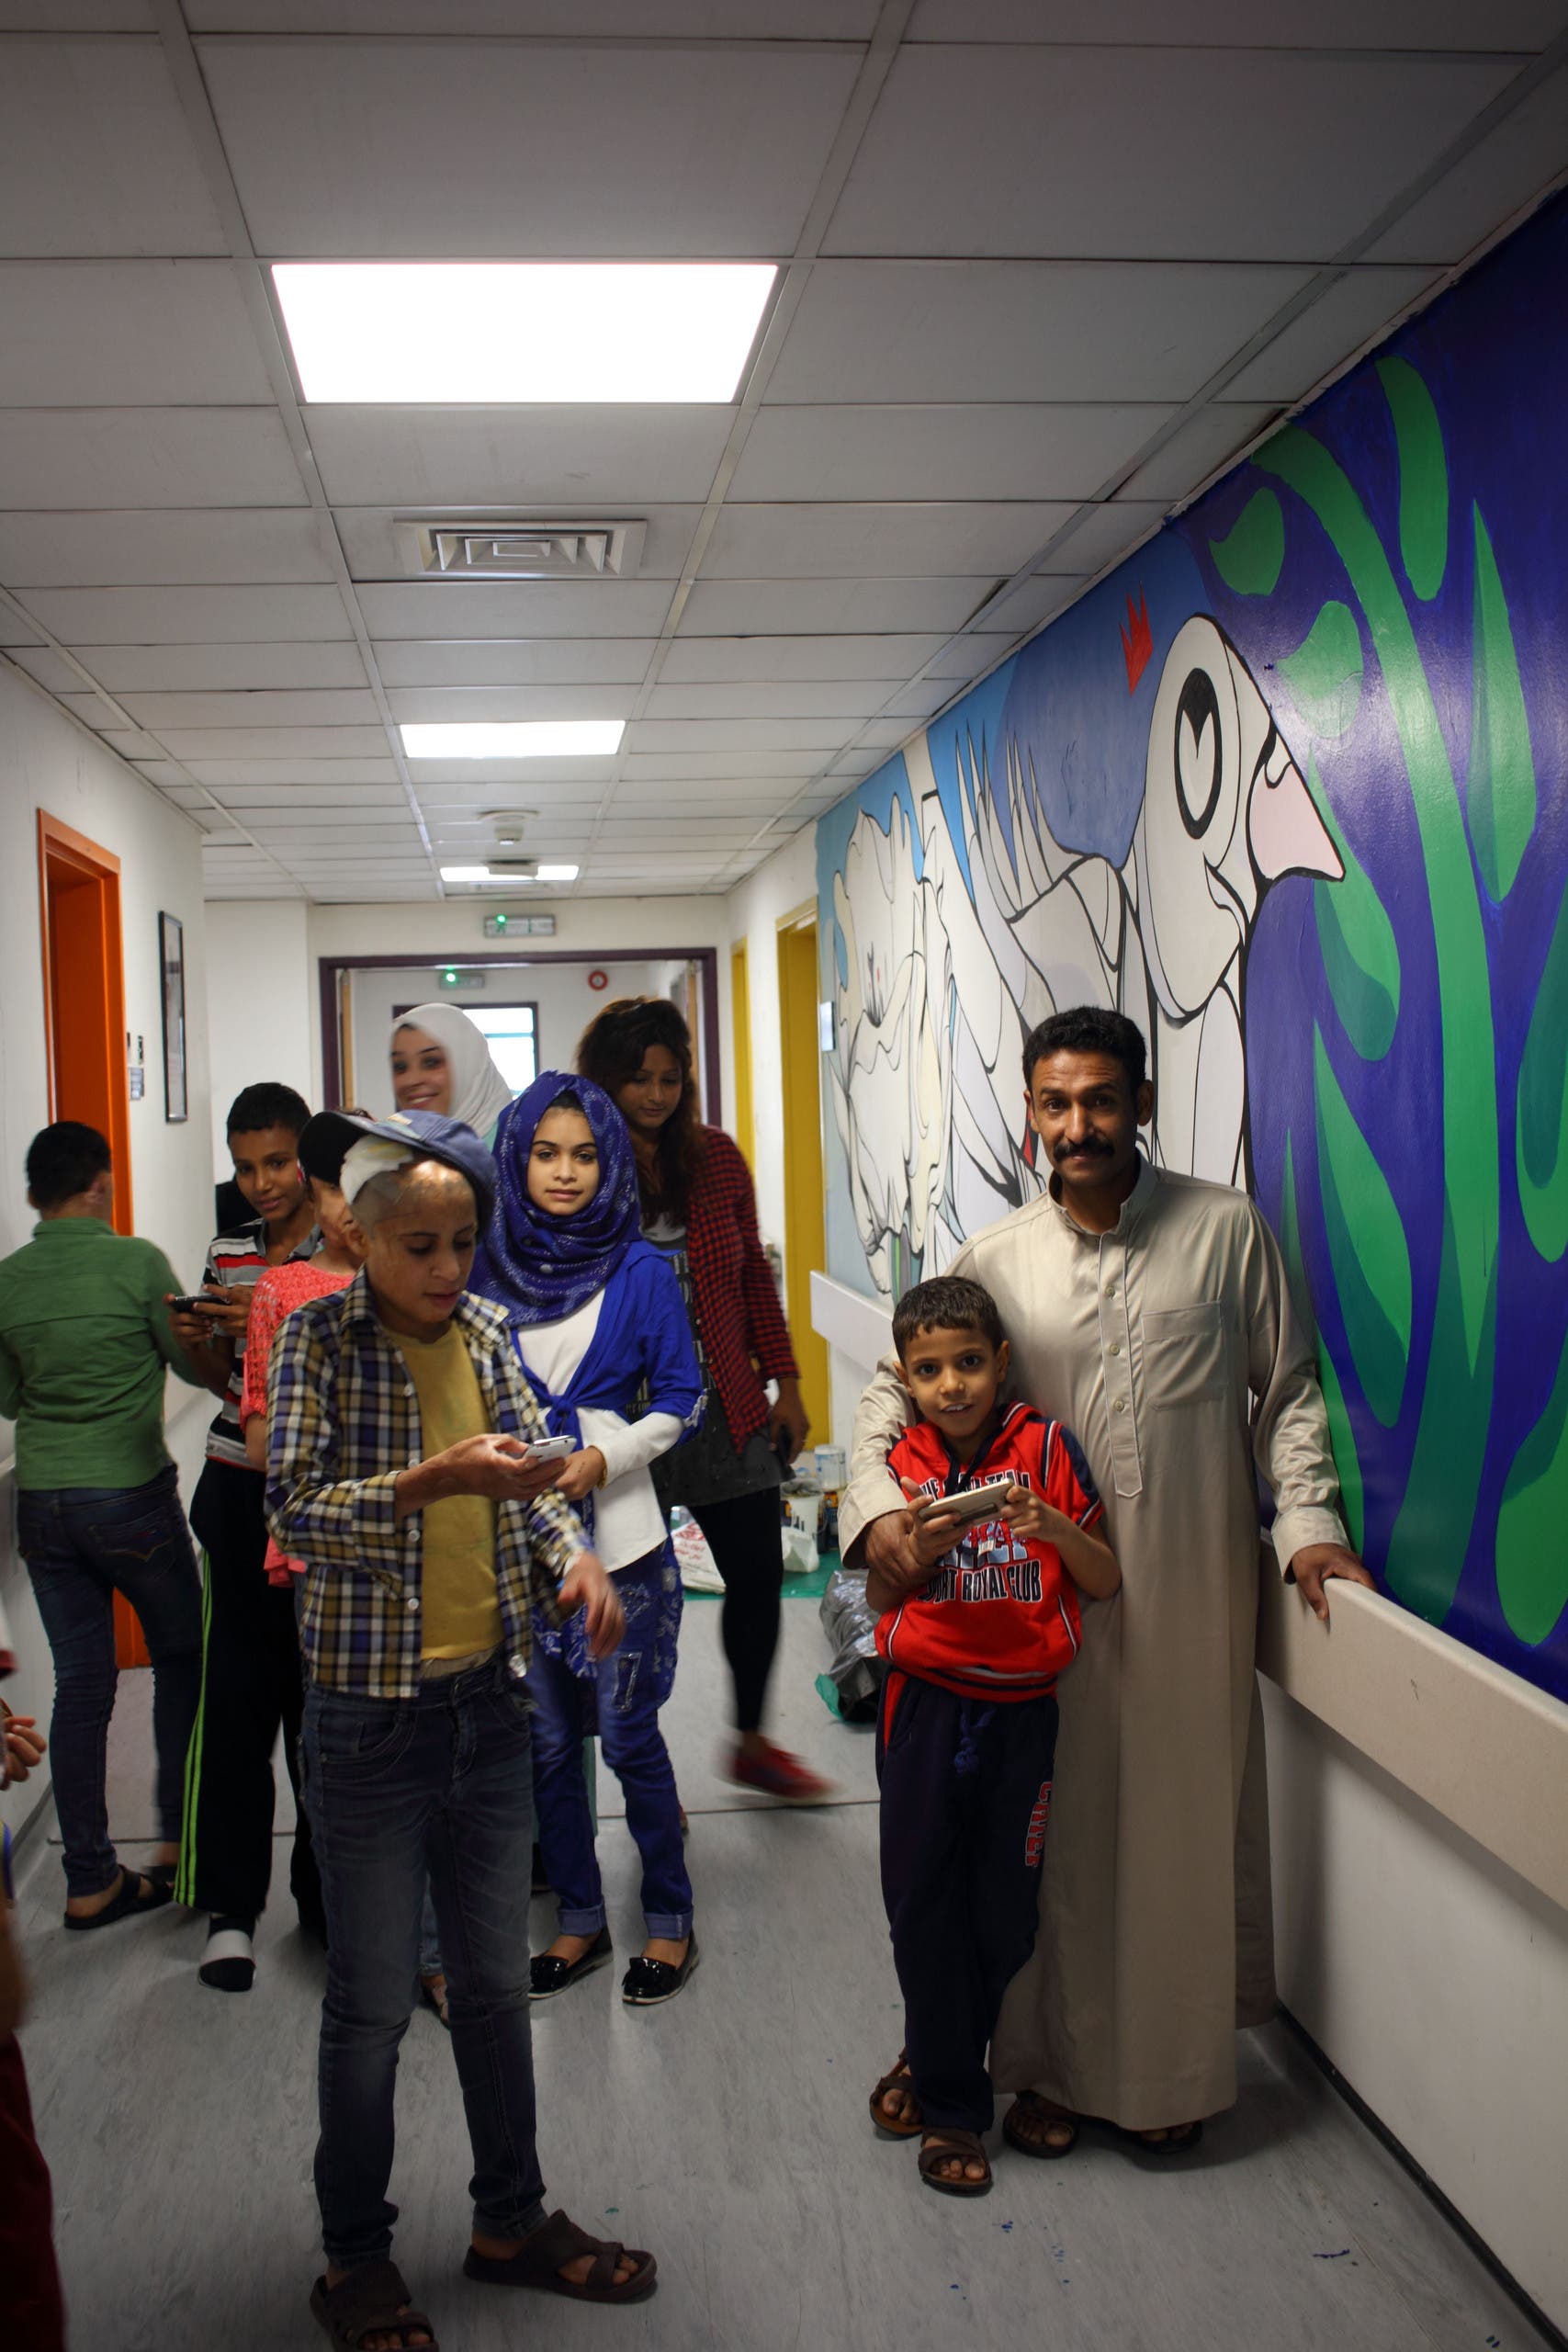 In May this year, the children at the MSF Reconstructive Surgery Hospital in Amman, Jordan. (Faris Al-Jawad/MSF)